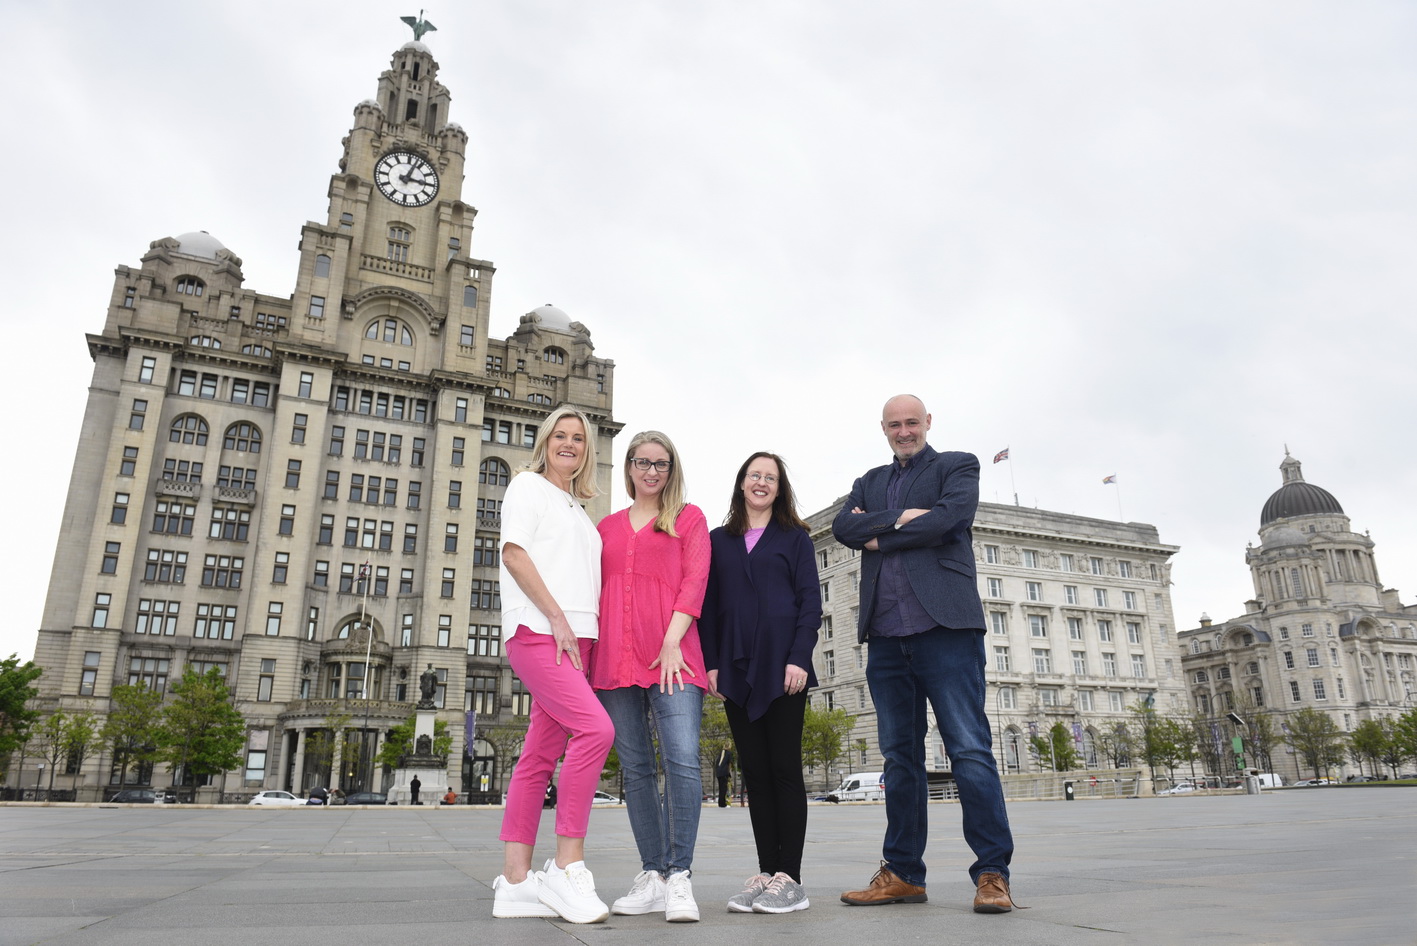 Liverpool commercial team business shot at Pierhead with Liver Building